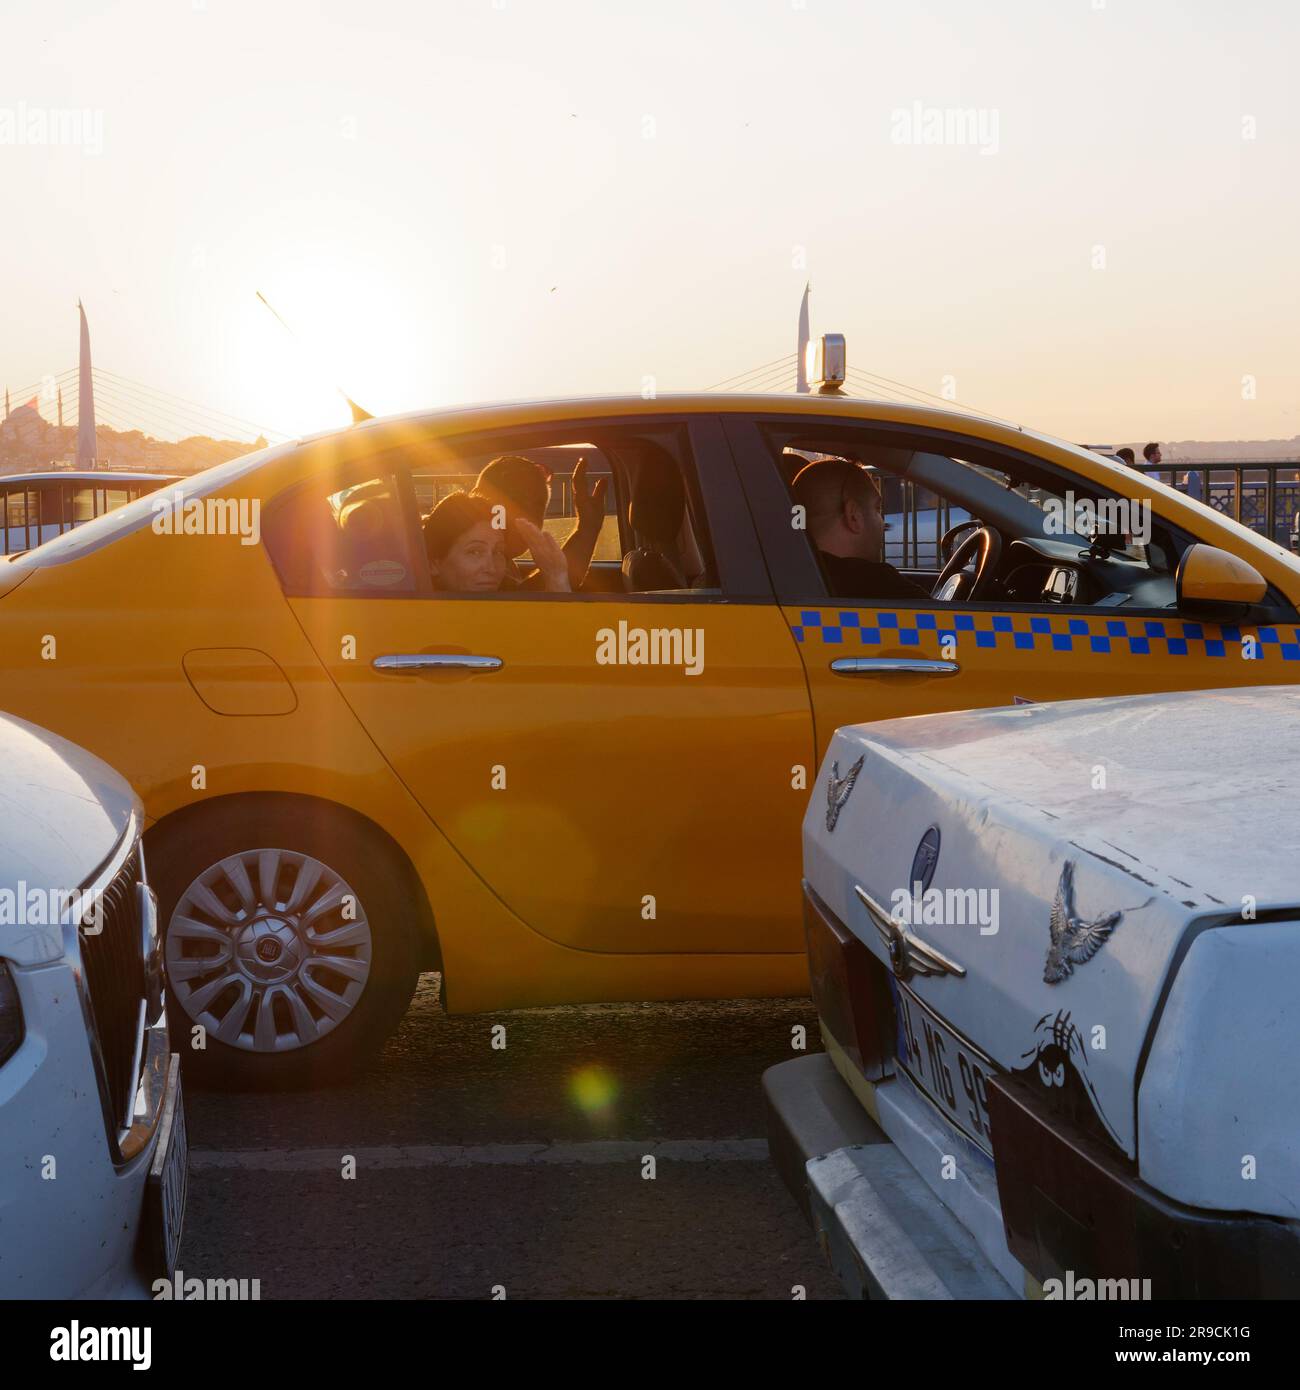 People wave from a yellow taxi on Galata Bridge approaching sunset on a summers evening, Istanbul, Turkey Stock Photo